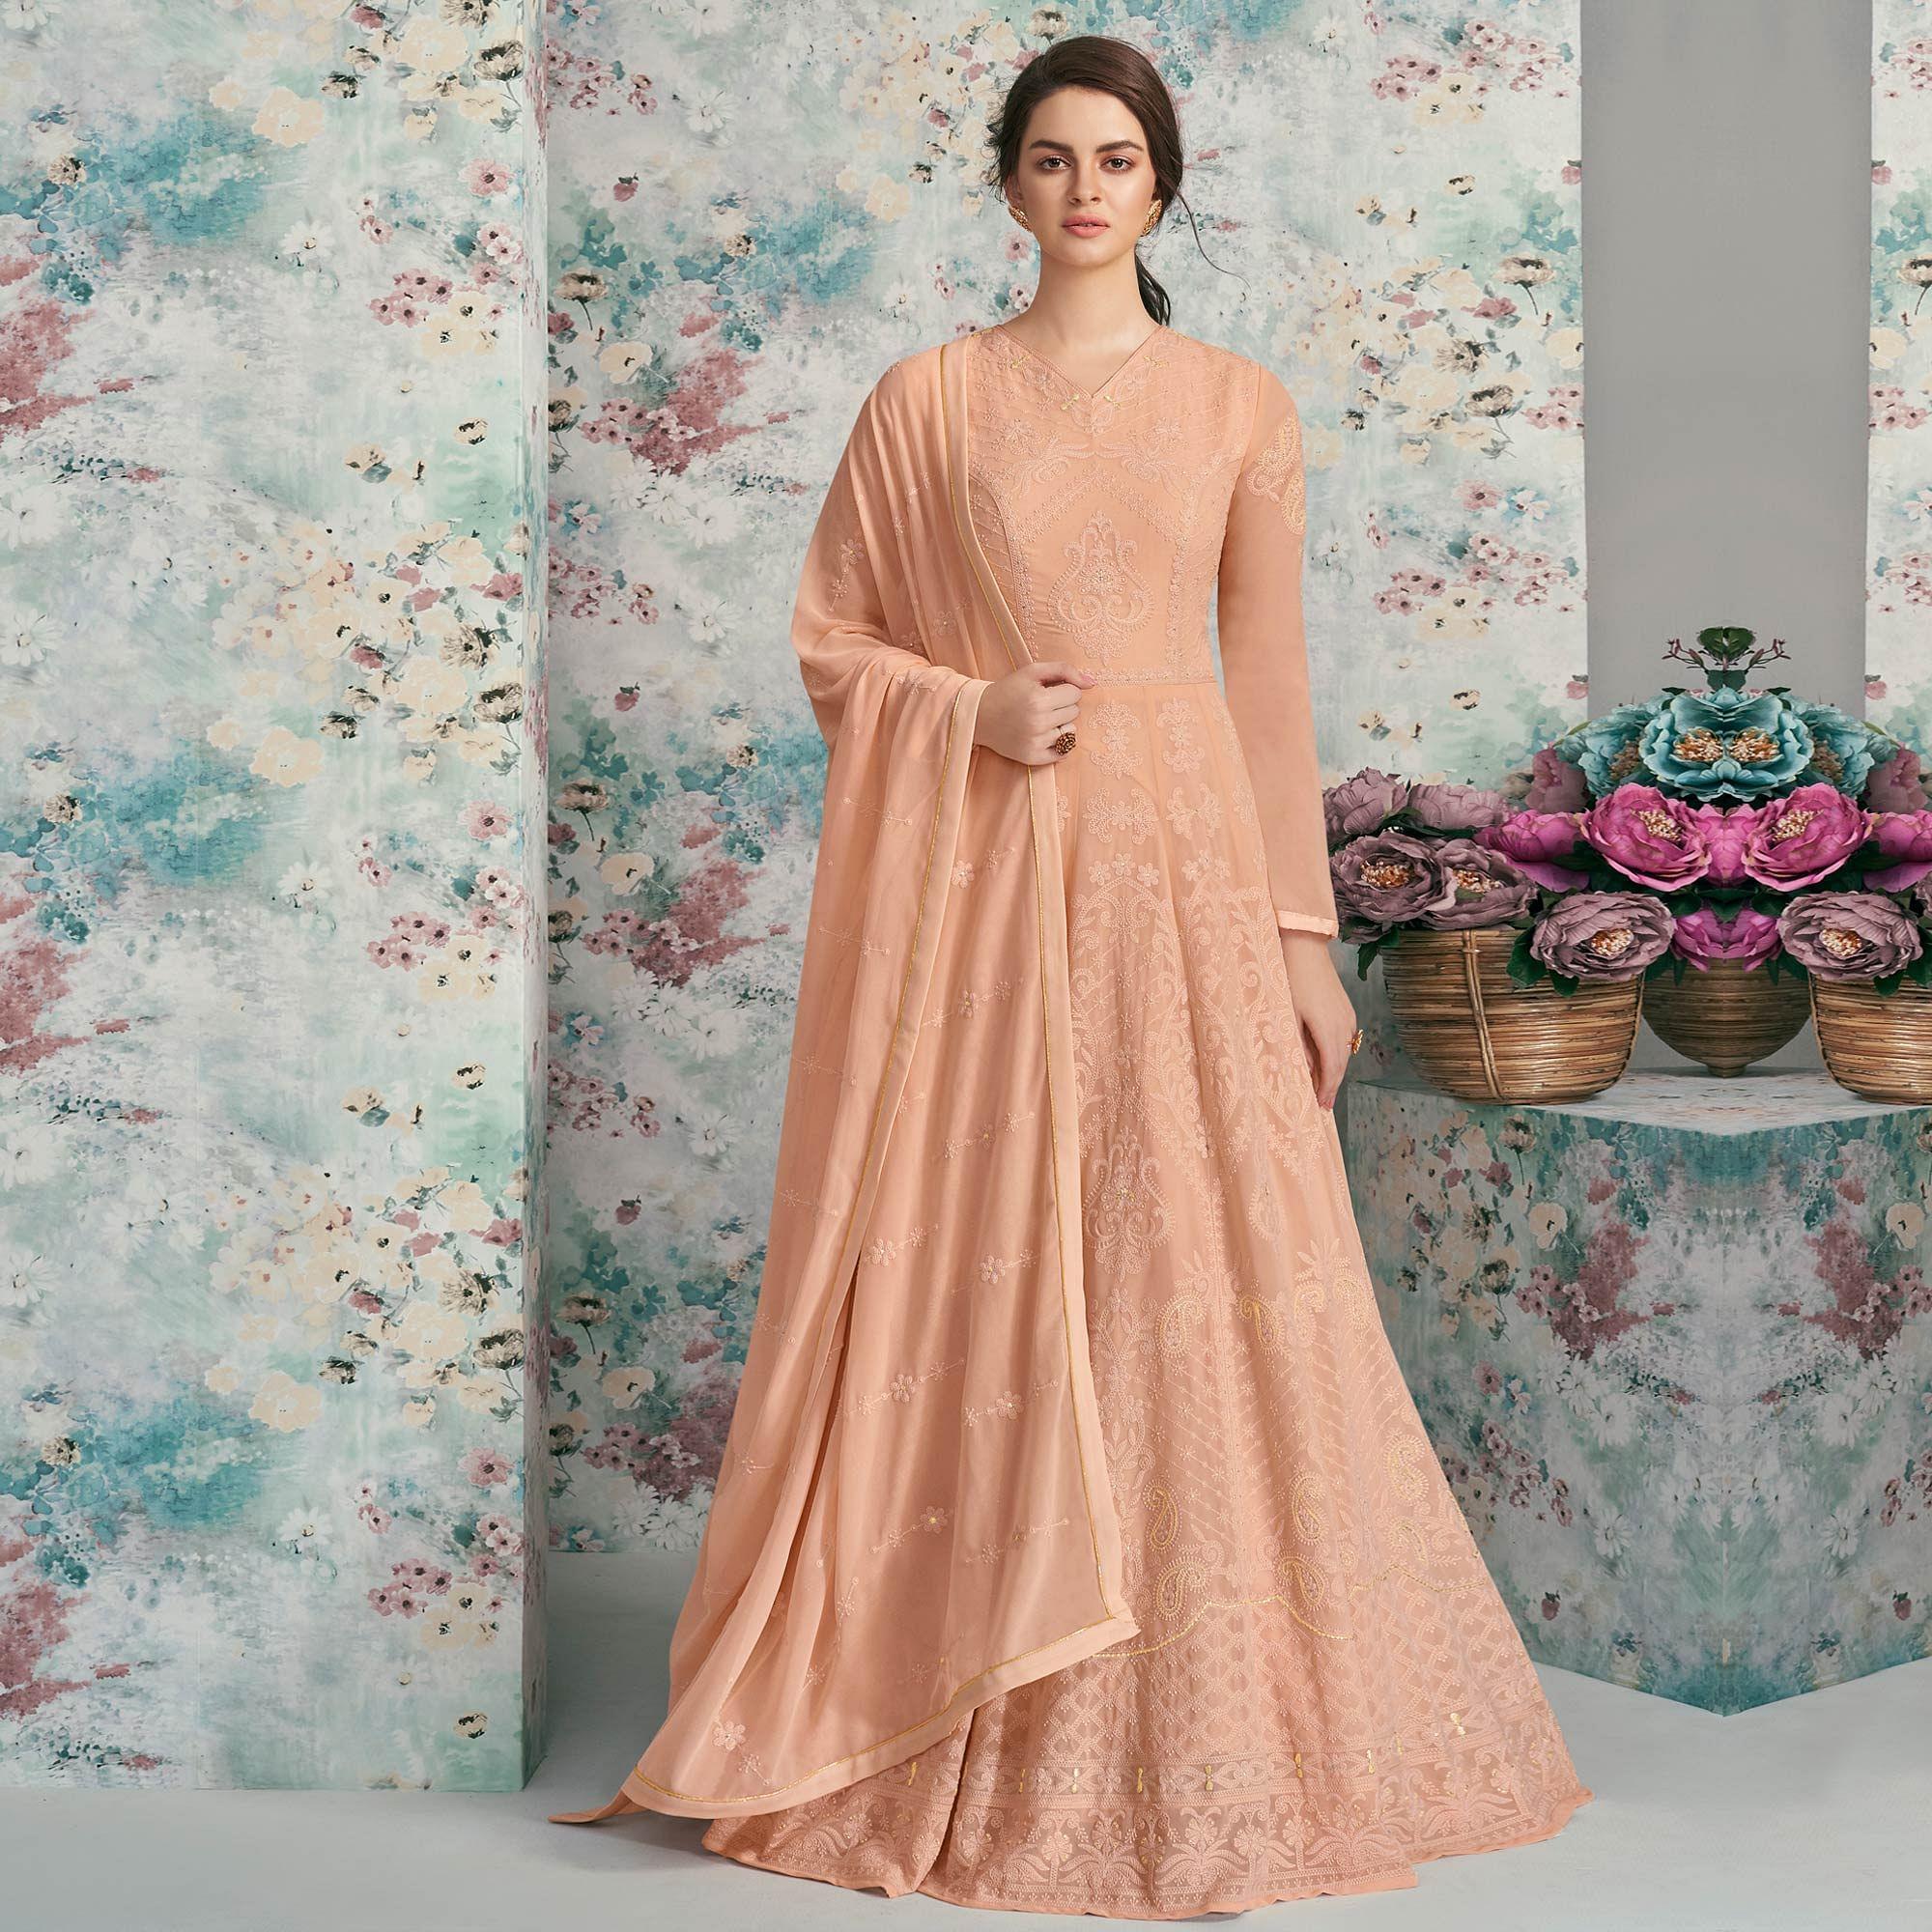 Delightful Peach Colored Party Wear Embroidered Heavy Faux Georgette Anarkali Suit - Peachmode